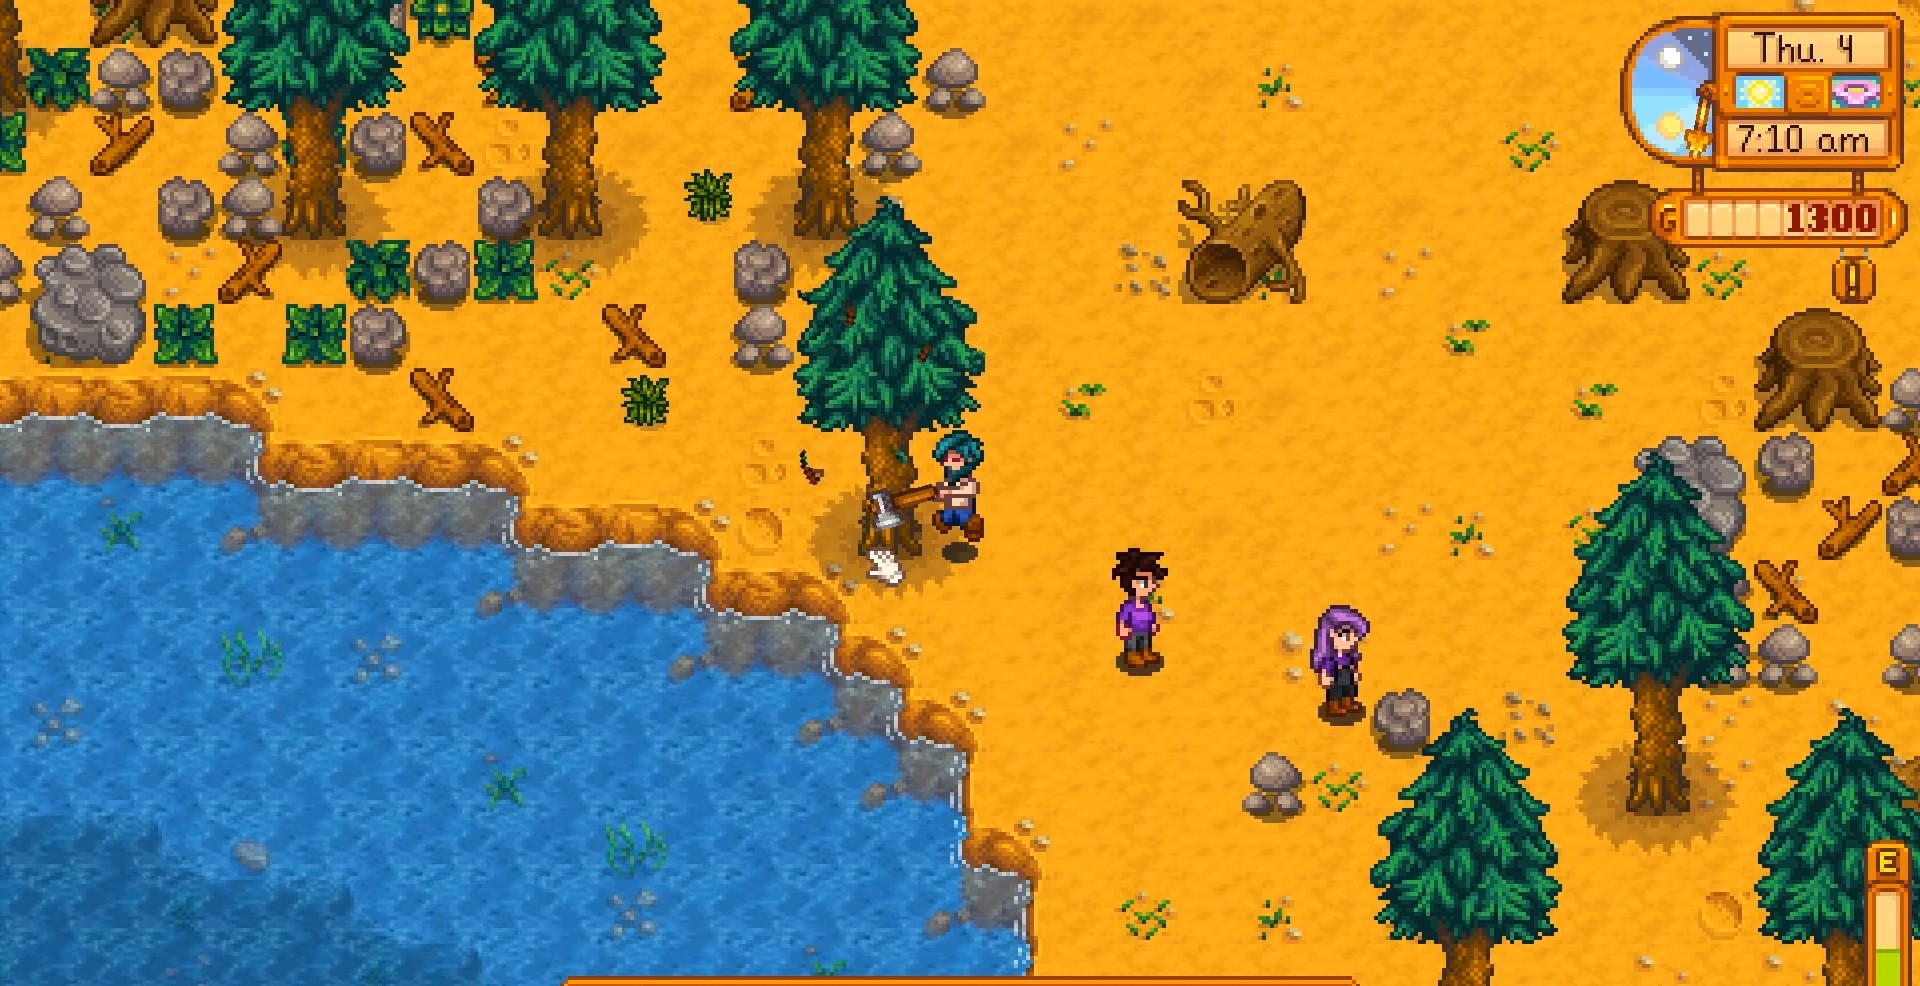 Everything you need to know about Stardew Valley multiplayer 